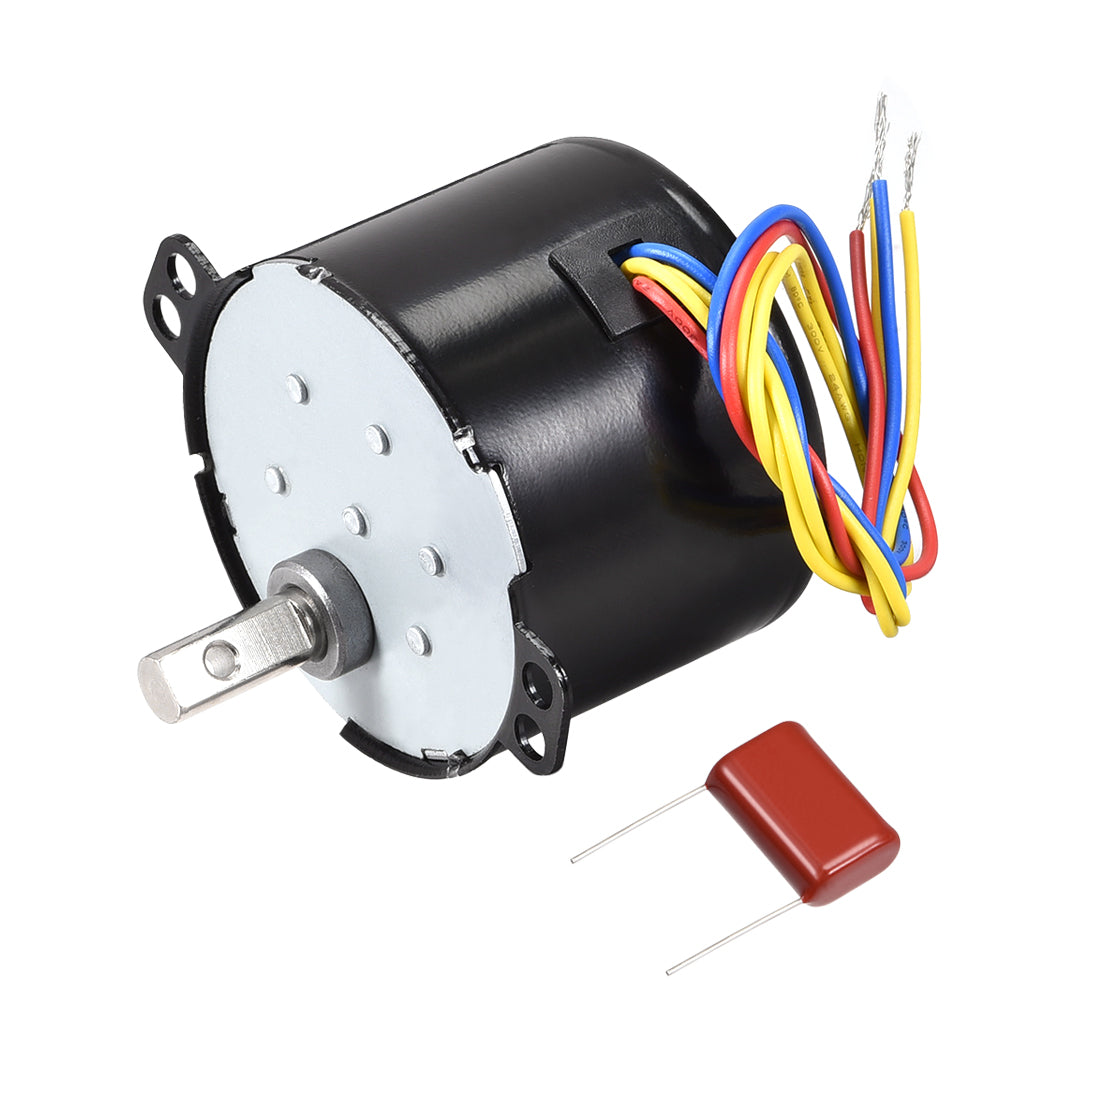 uxcell Uxcell AC 220V Electric Synchronous Motor Plastic Gear Turntable /C 1RPM 50-60HZ 6W 7mm Dia Eccentric Shaft with Hole